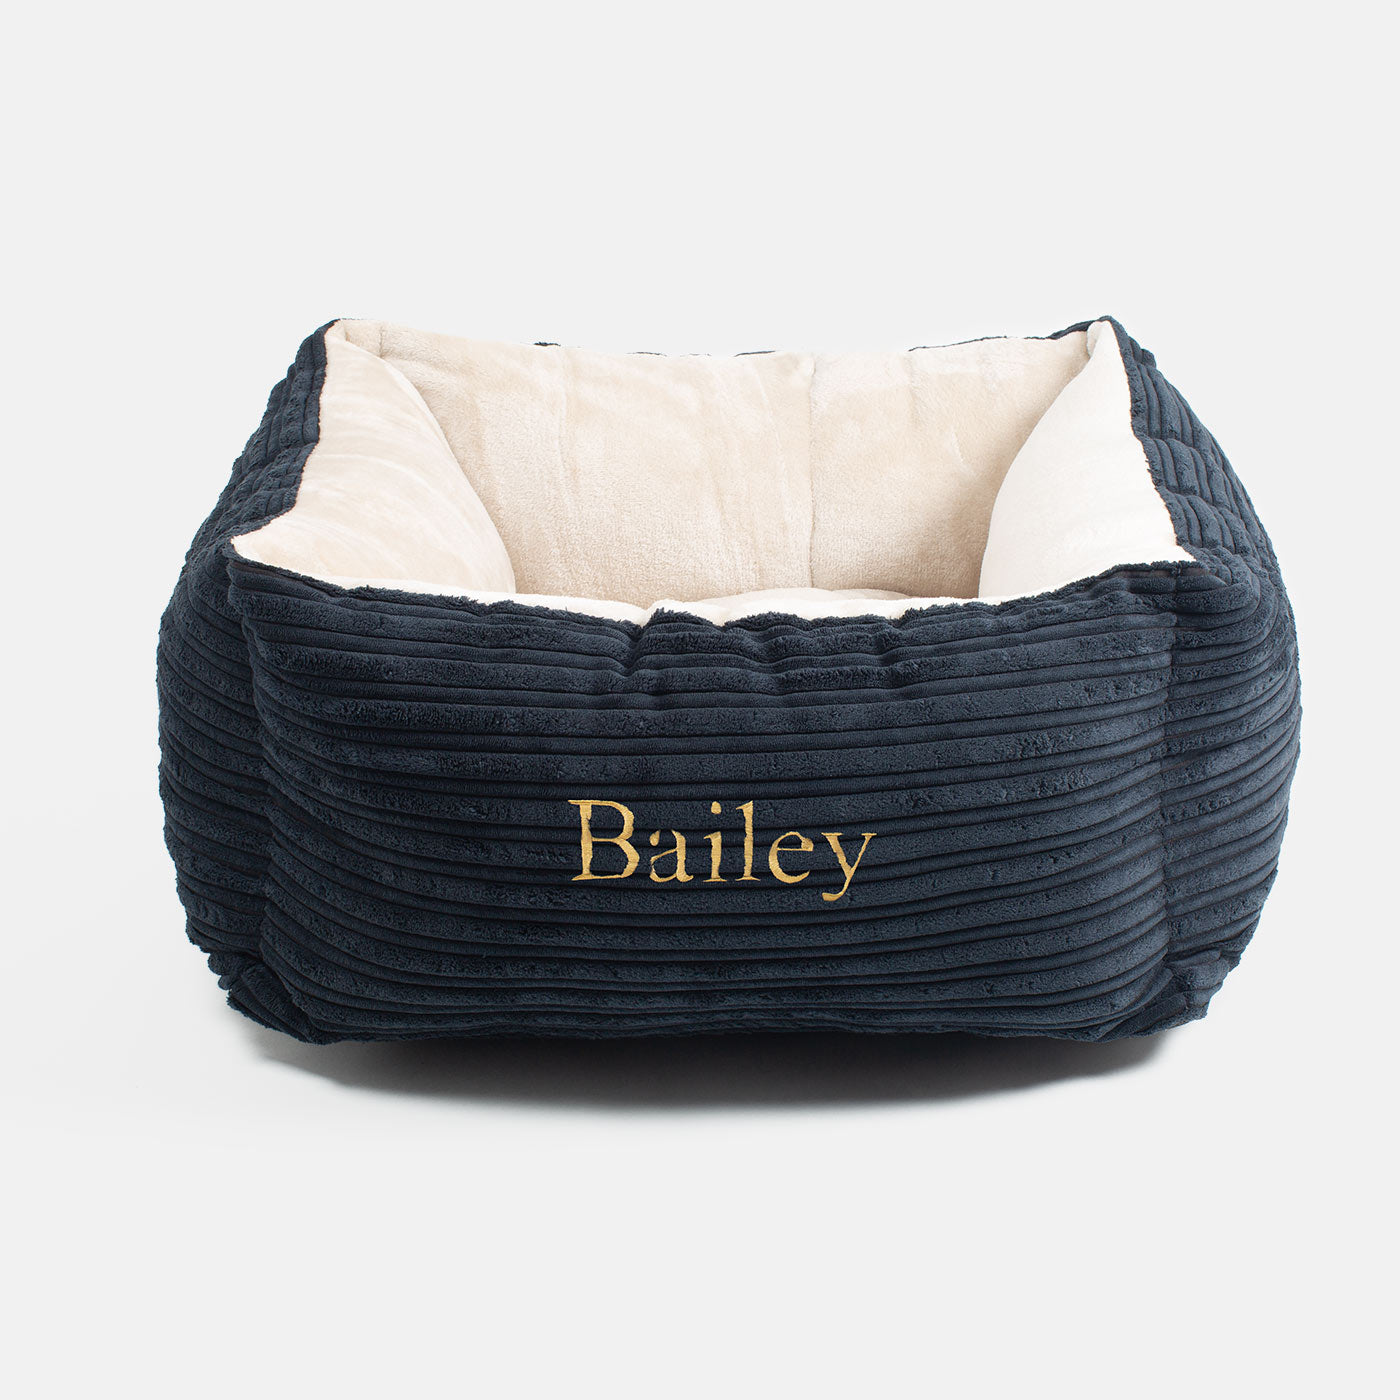 Super Soft, Plush Fabric Essentials Box Bed For Dogs, A Luxury Dog Bed Made Using Sherpa/Fleece To Bring The Perfect Pet Bed For The Ultimate Nap Time! Available Now at Lords & Labradors